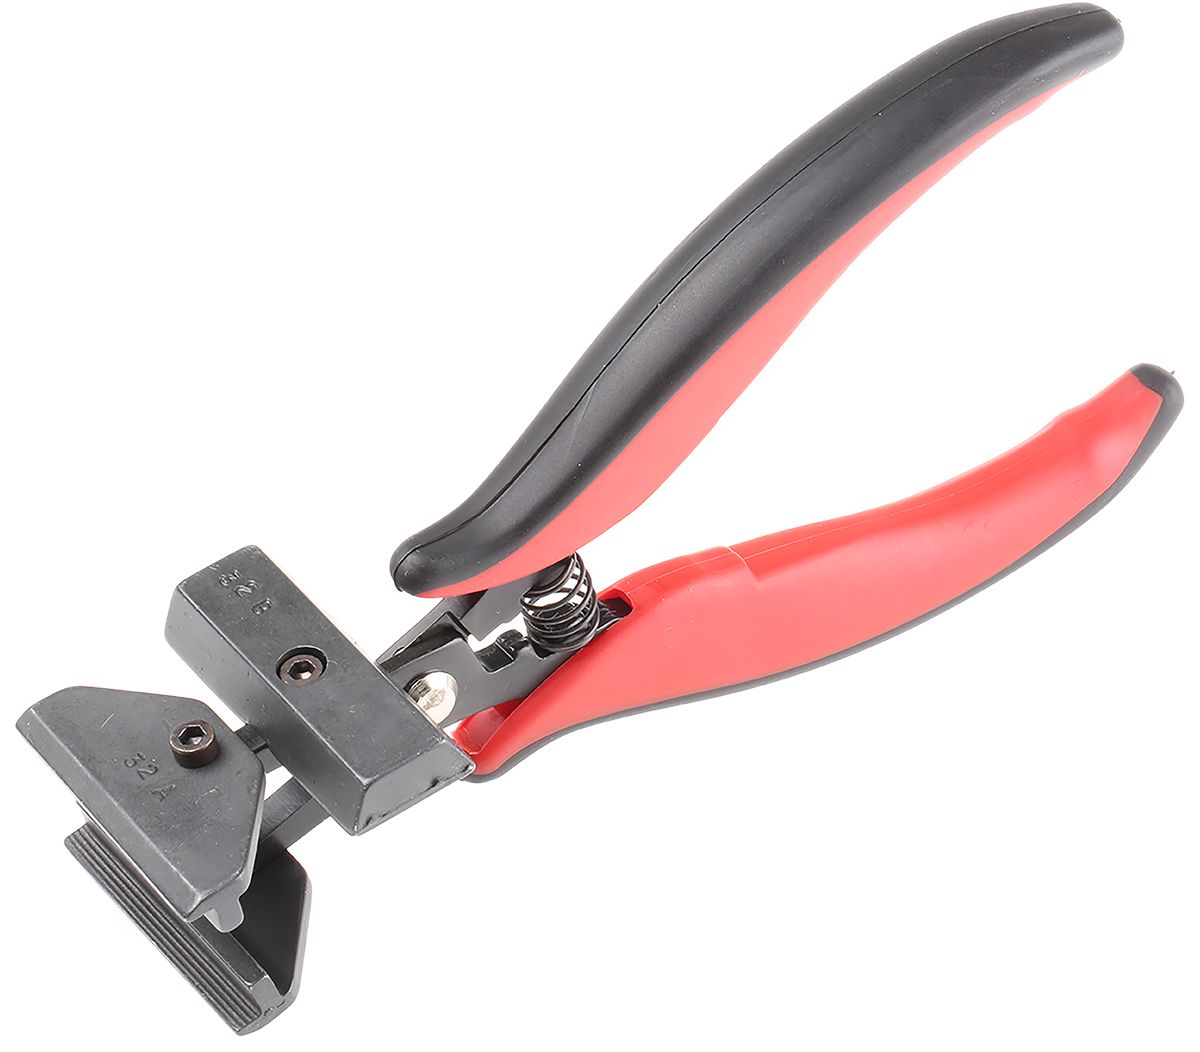 RS PRO Crimp Extraction Tool, Pin Contact